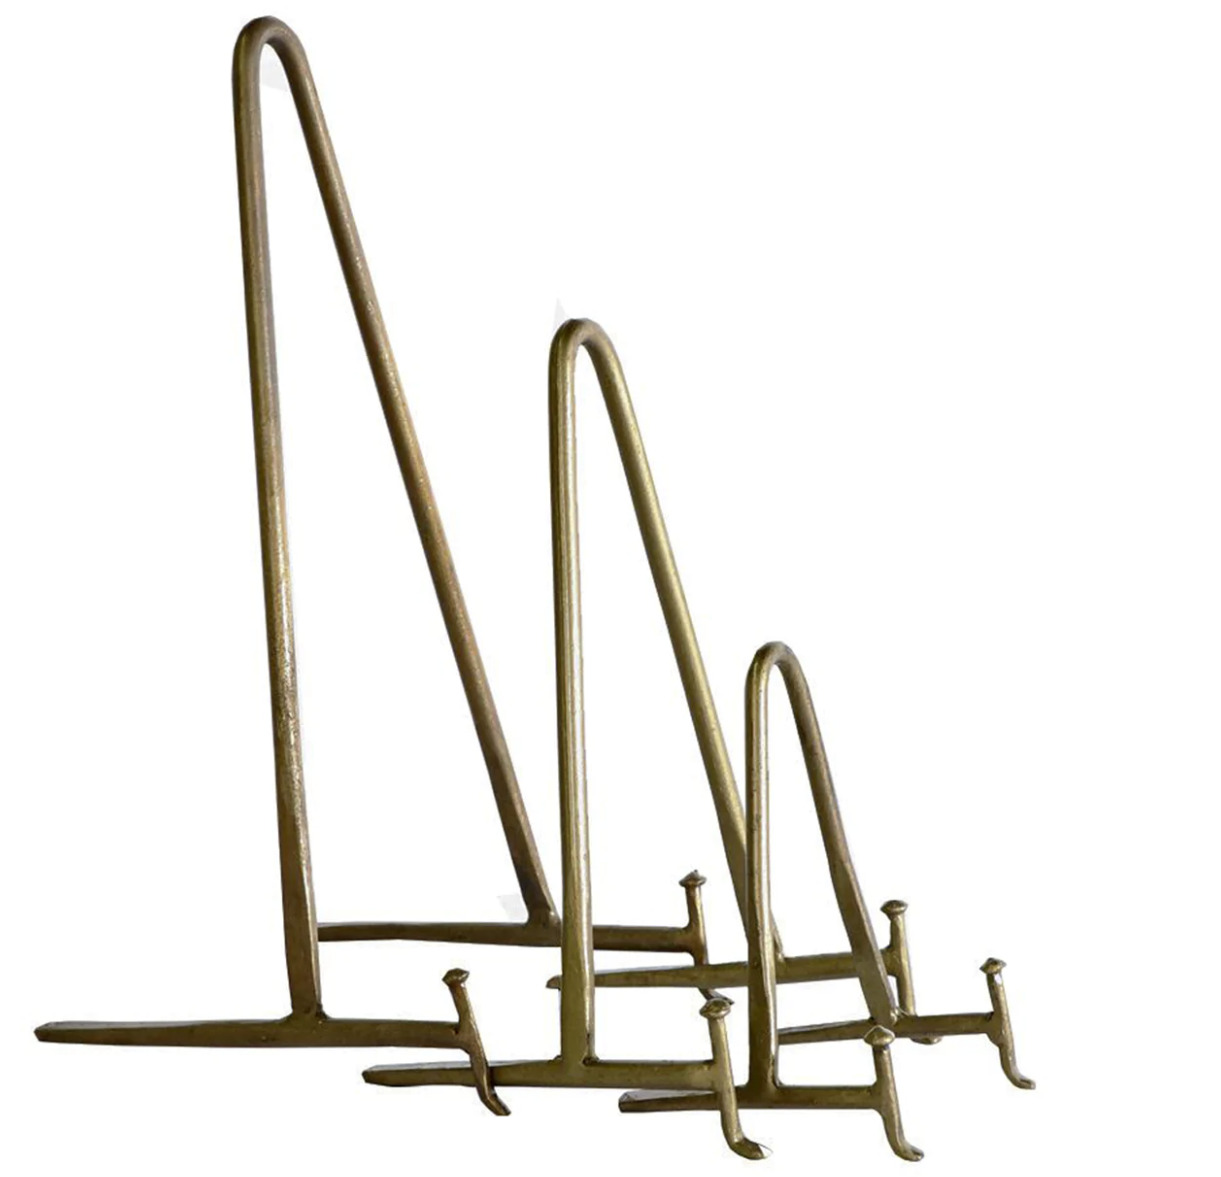 Antique Brass Stand - Small: Small antique brass stand with a vintage design from Grace Blu Shoppe, ideal for adding a touch of charm to your home decor.